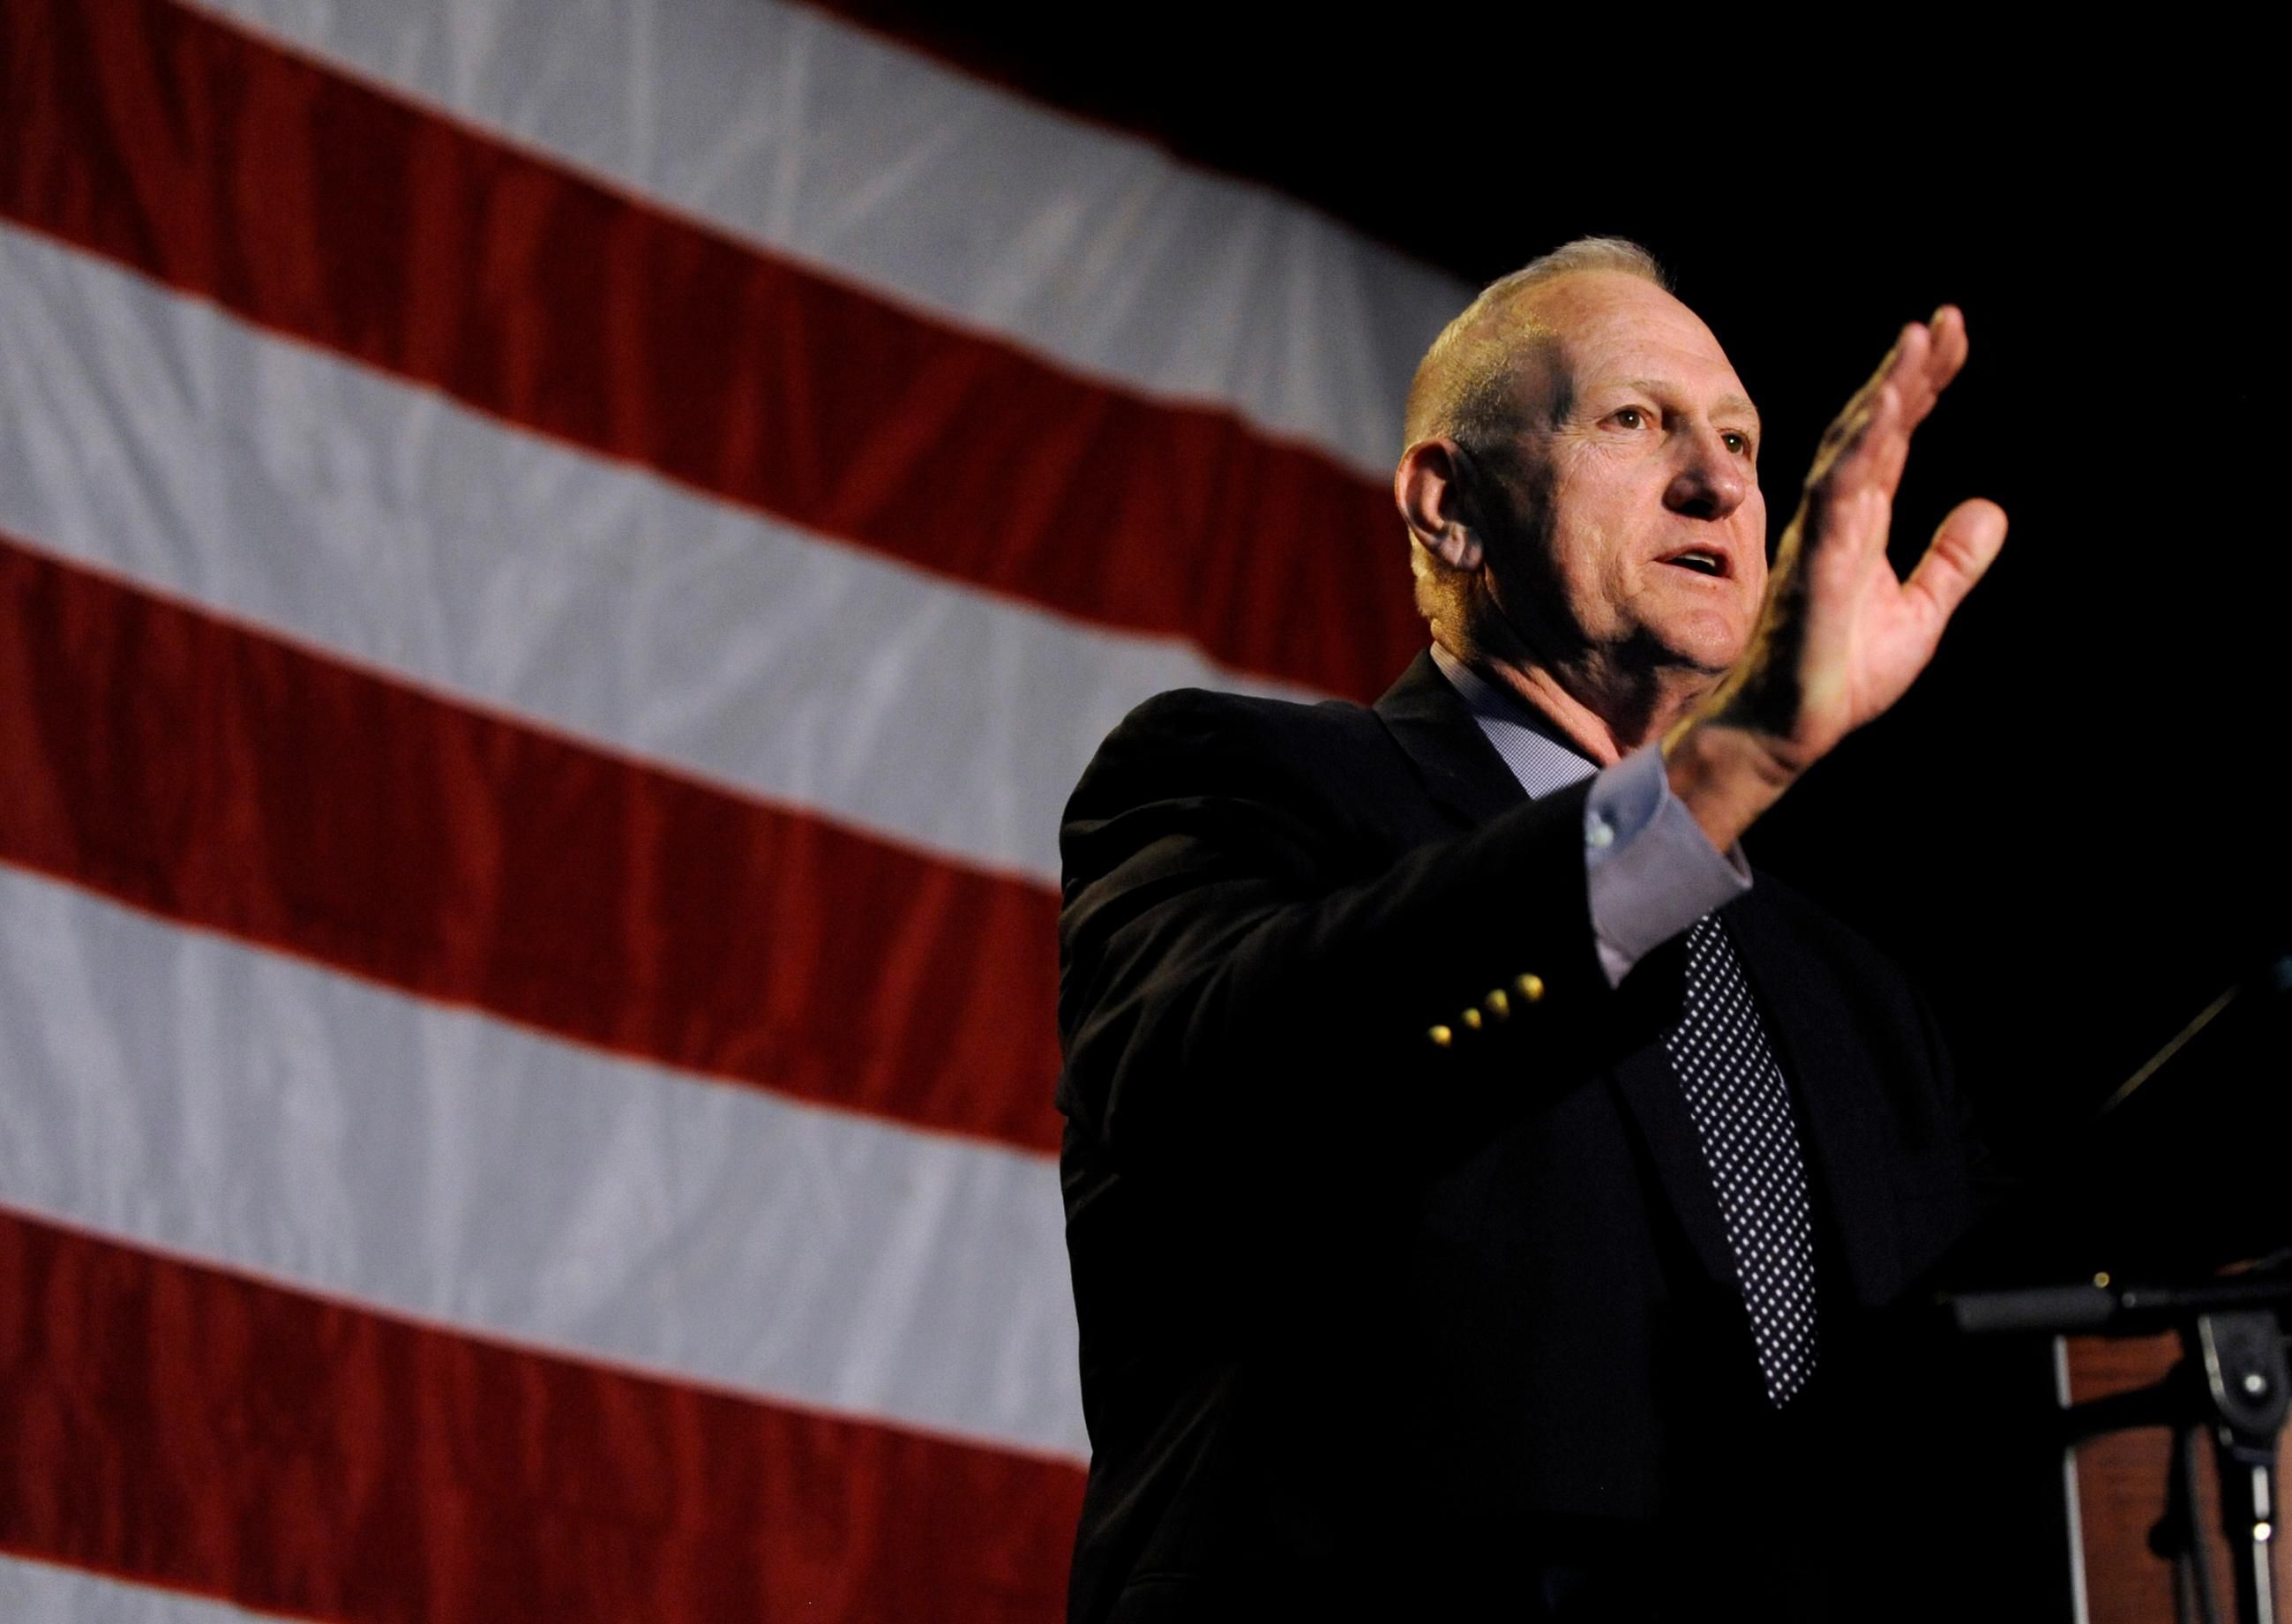 Gen. William Boykin addresses a crowd during a speech at Colorado Christian University on Monday, May 2, 2011.